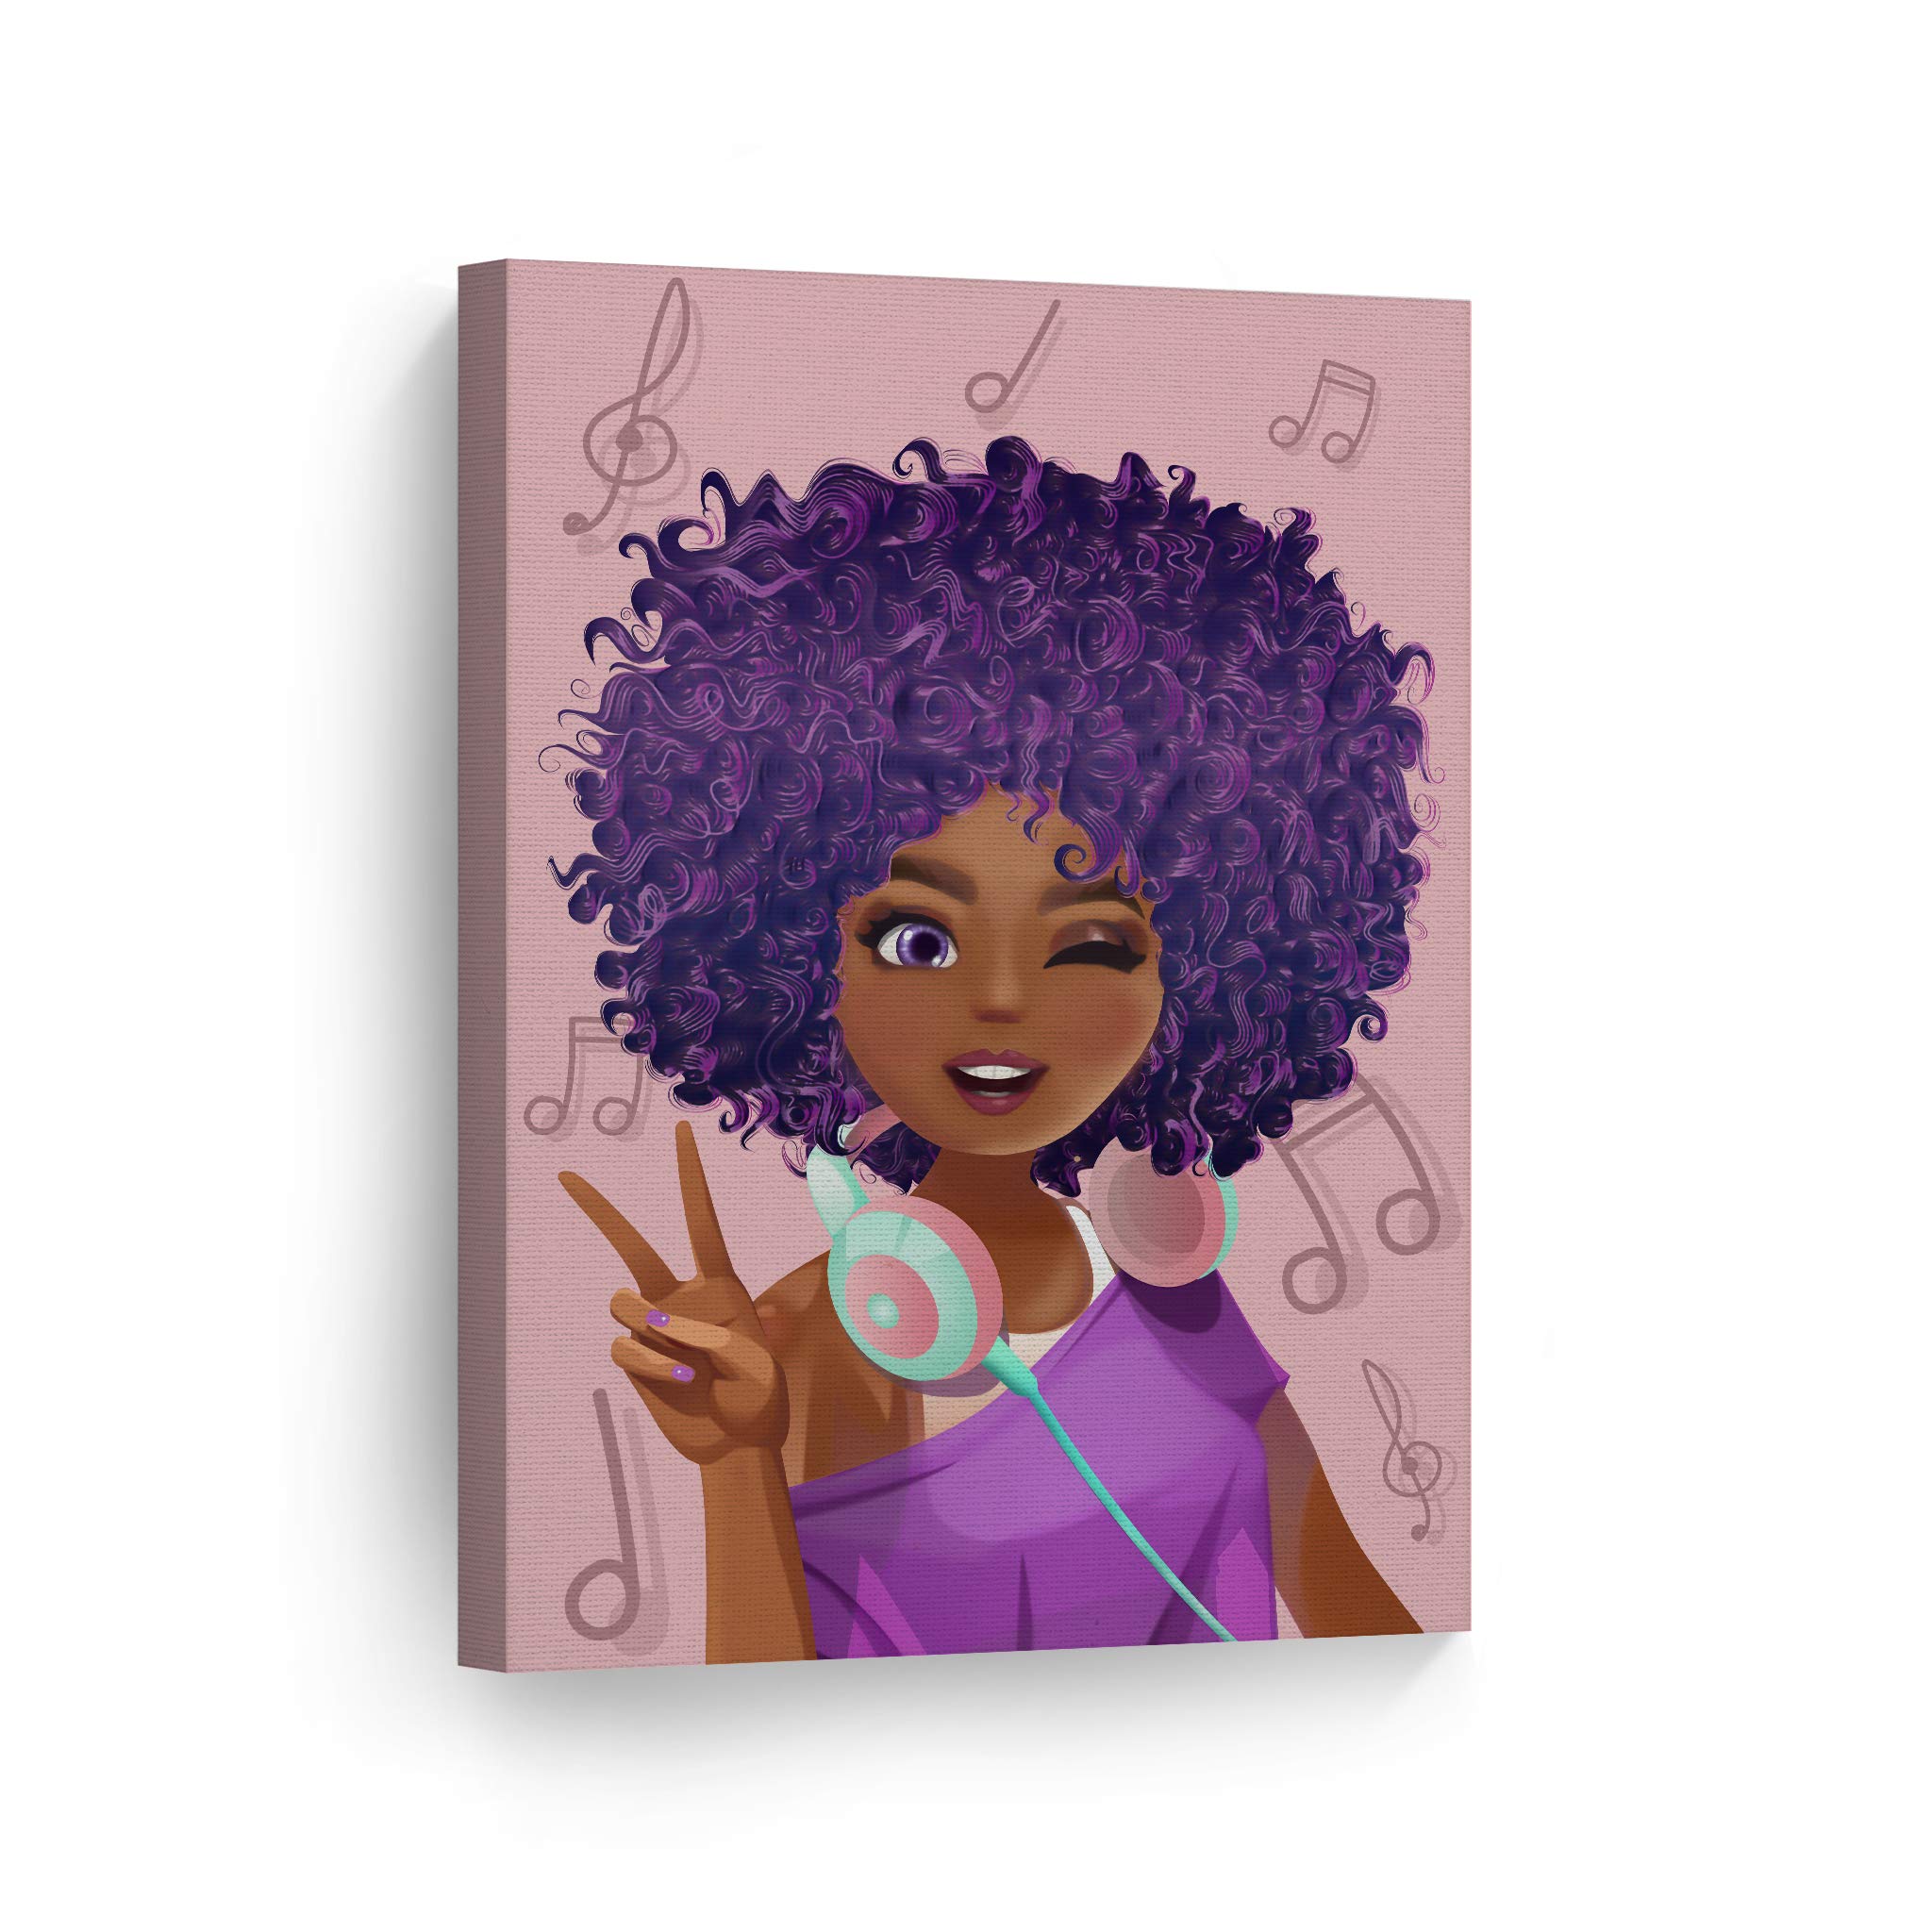 Book Cover Purple Haired African Girl Earphones Pink Background Digital Painting Canvas Print Kids Room Wall Art African Art Home Decor Stretched Ready to Hang -100% Handmade in The USA - 12x8 12 in x 8 in-Ready to Hang African V188